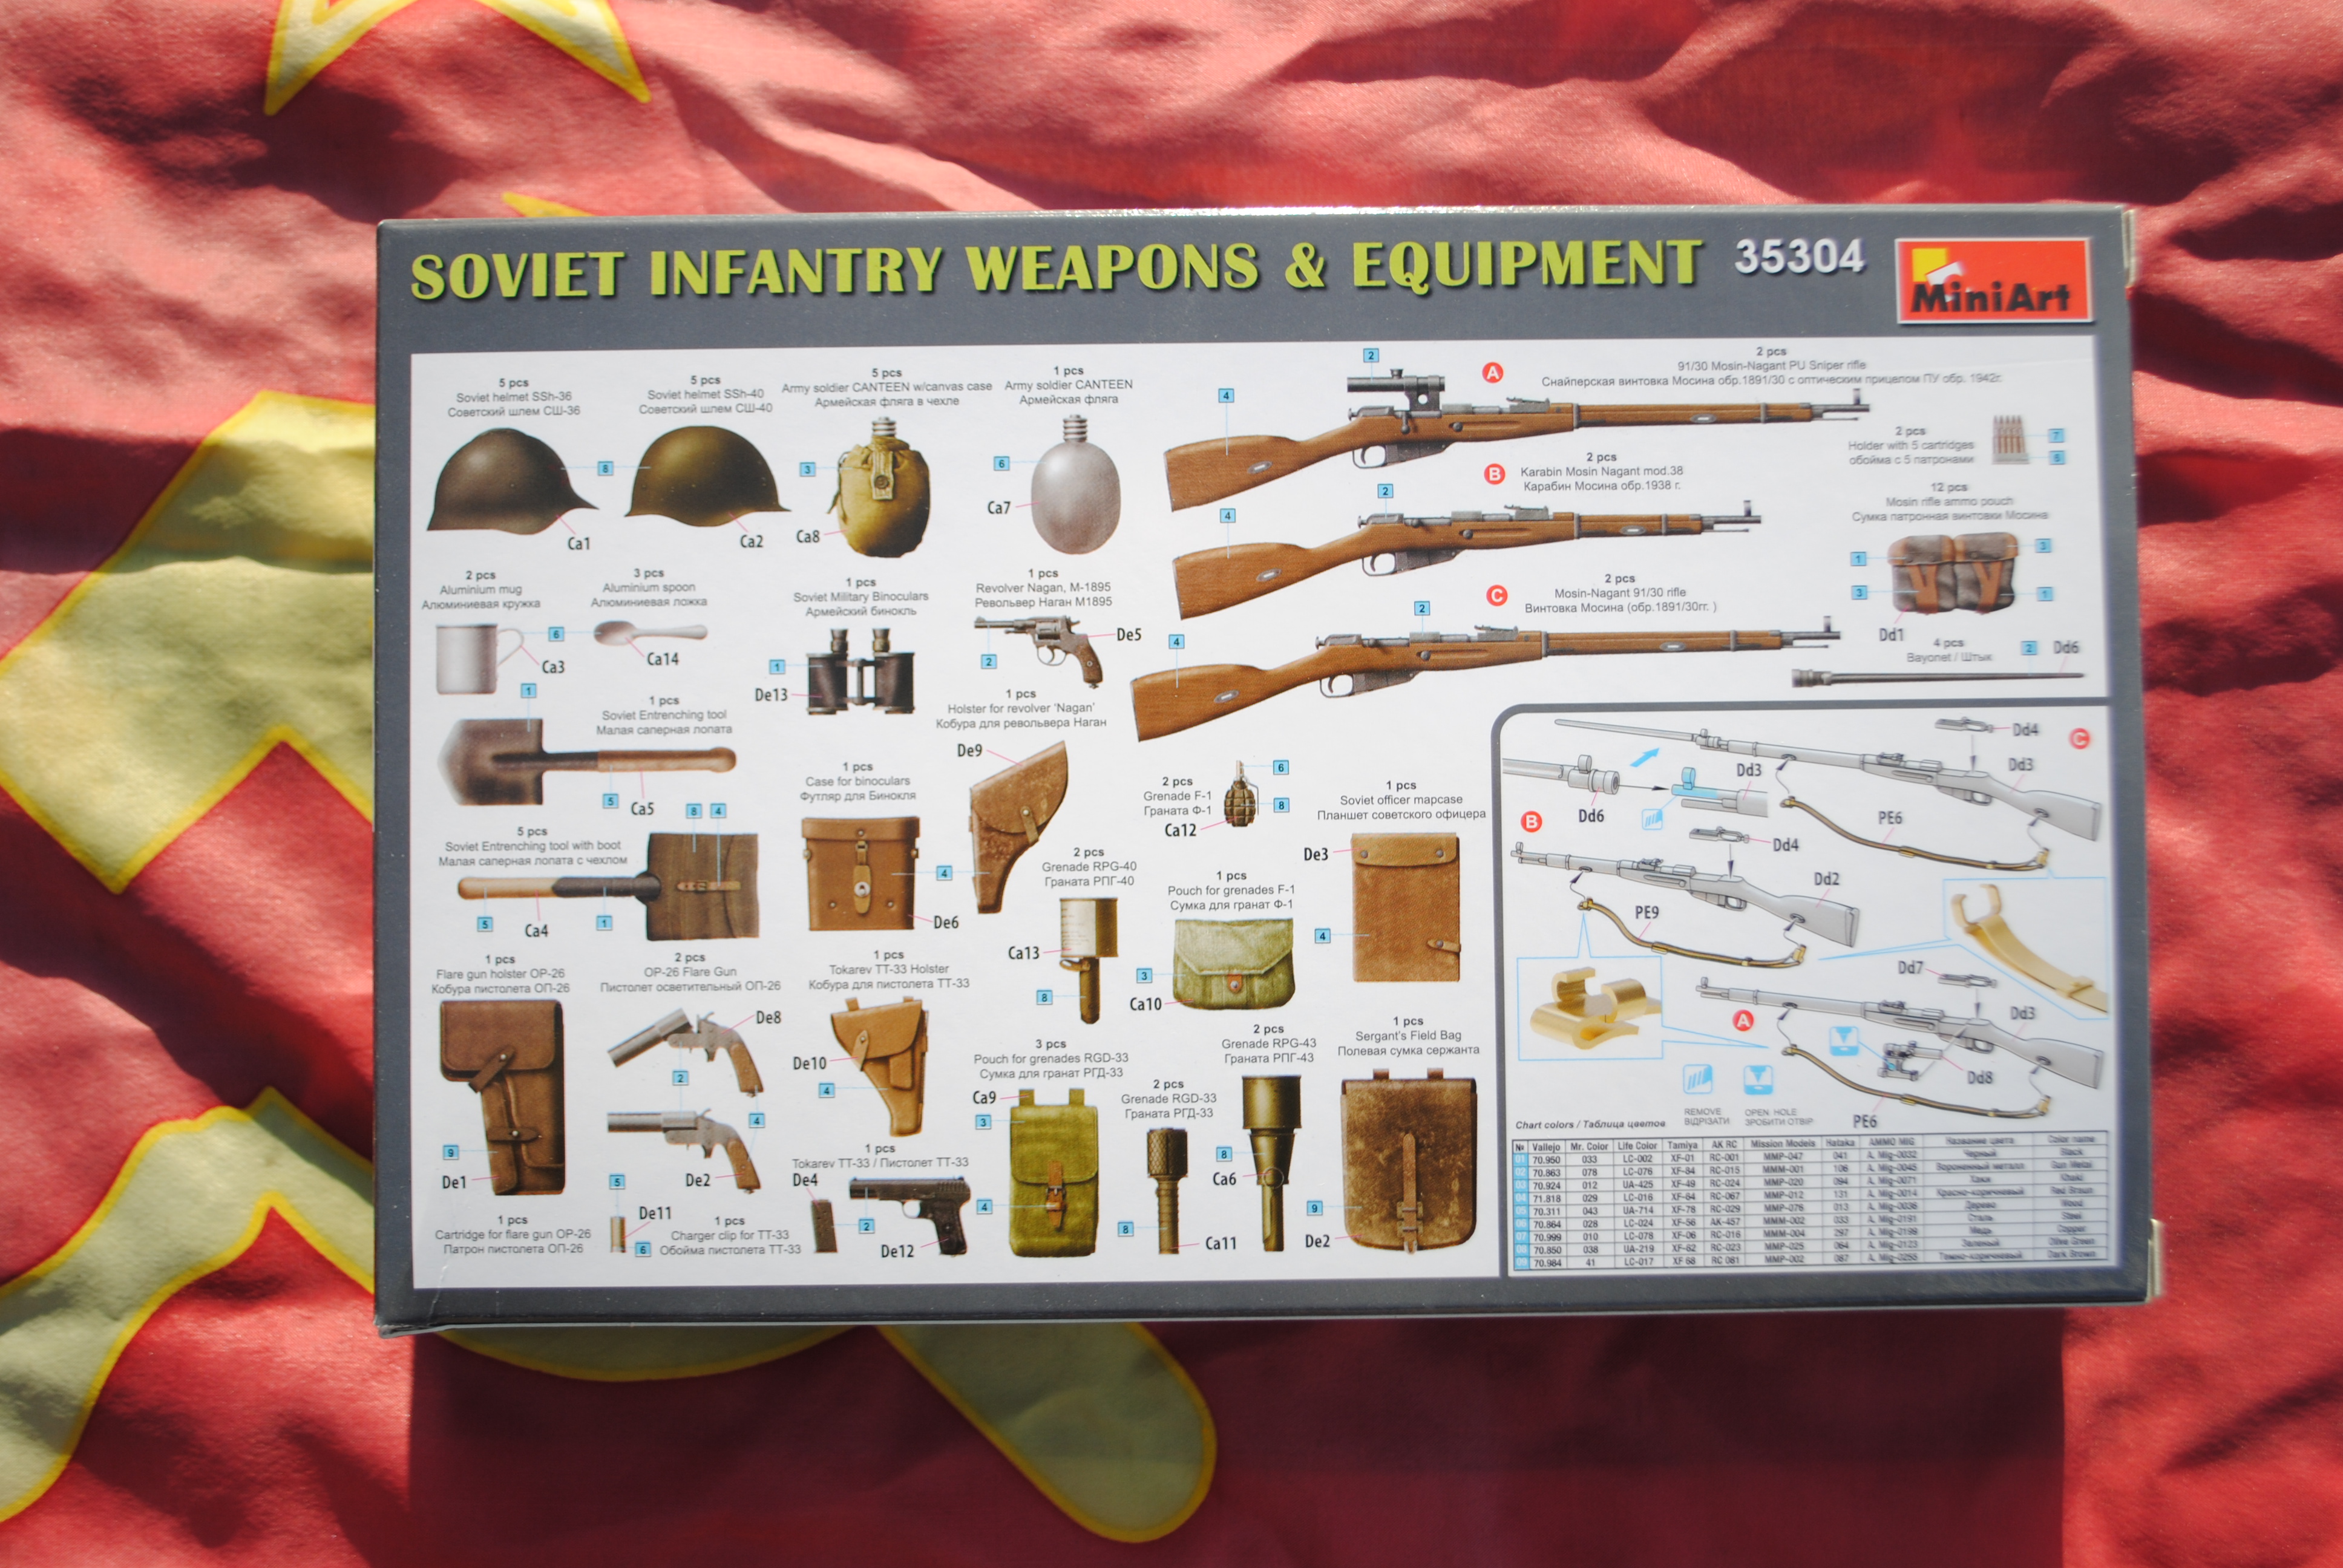 Mini Art 35304 SOVIET INFANTRY WEAPONS & EQUIPMENT. SPECIAL EDITION